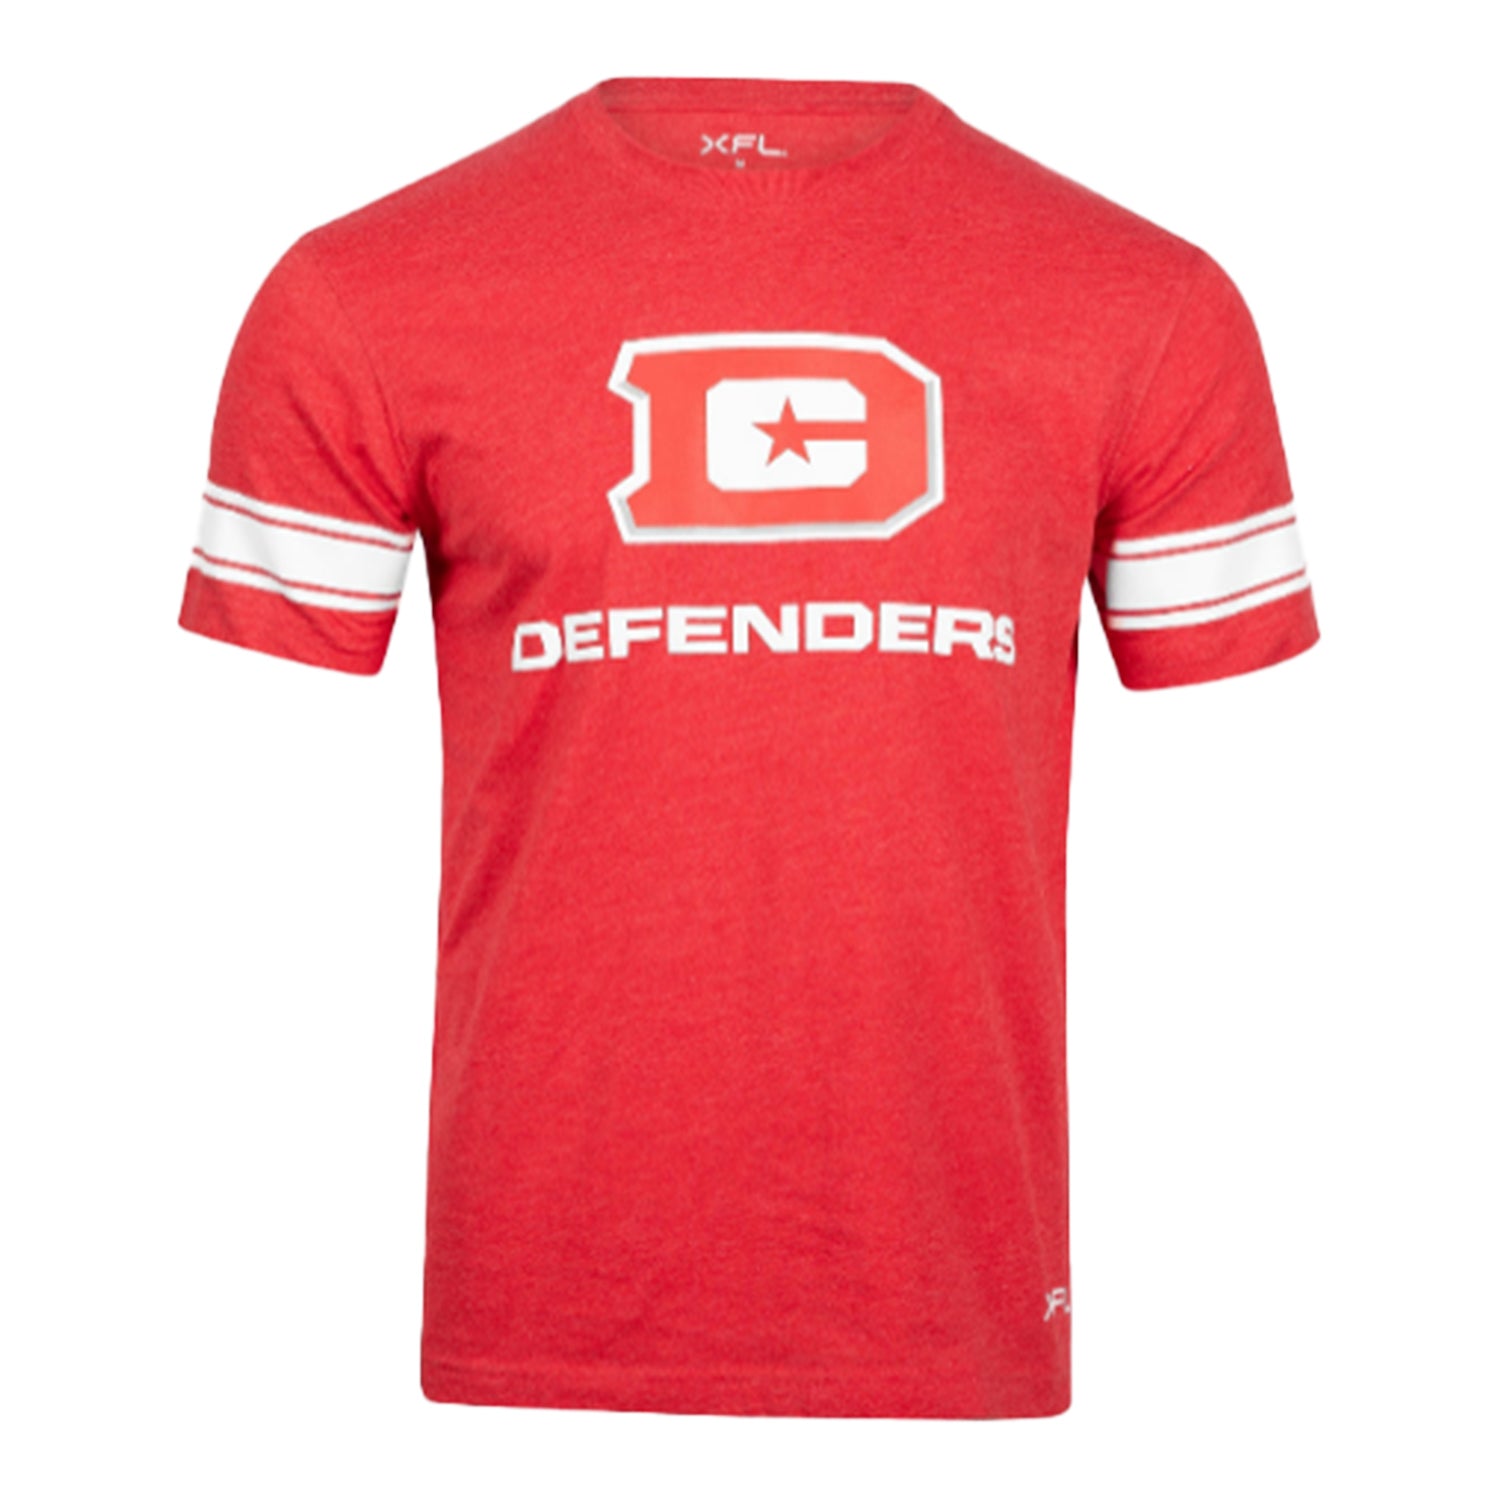 Defenders Stripe Sleeve Short Sleeve T-Shirt In Red - Front View